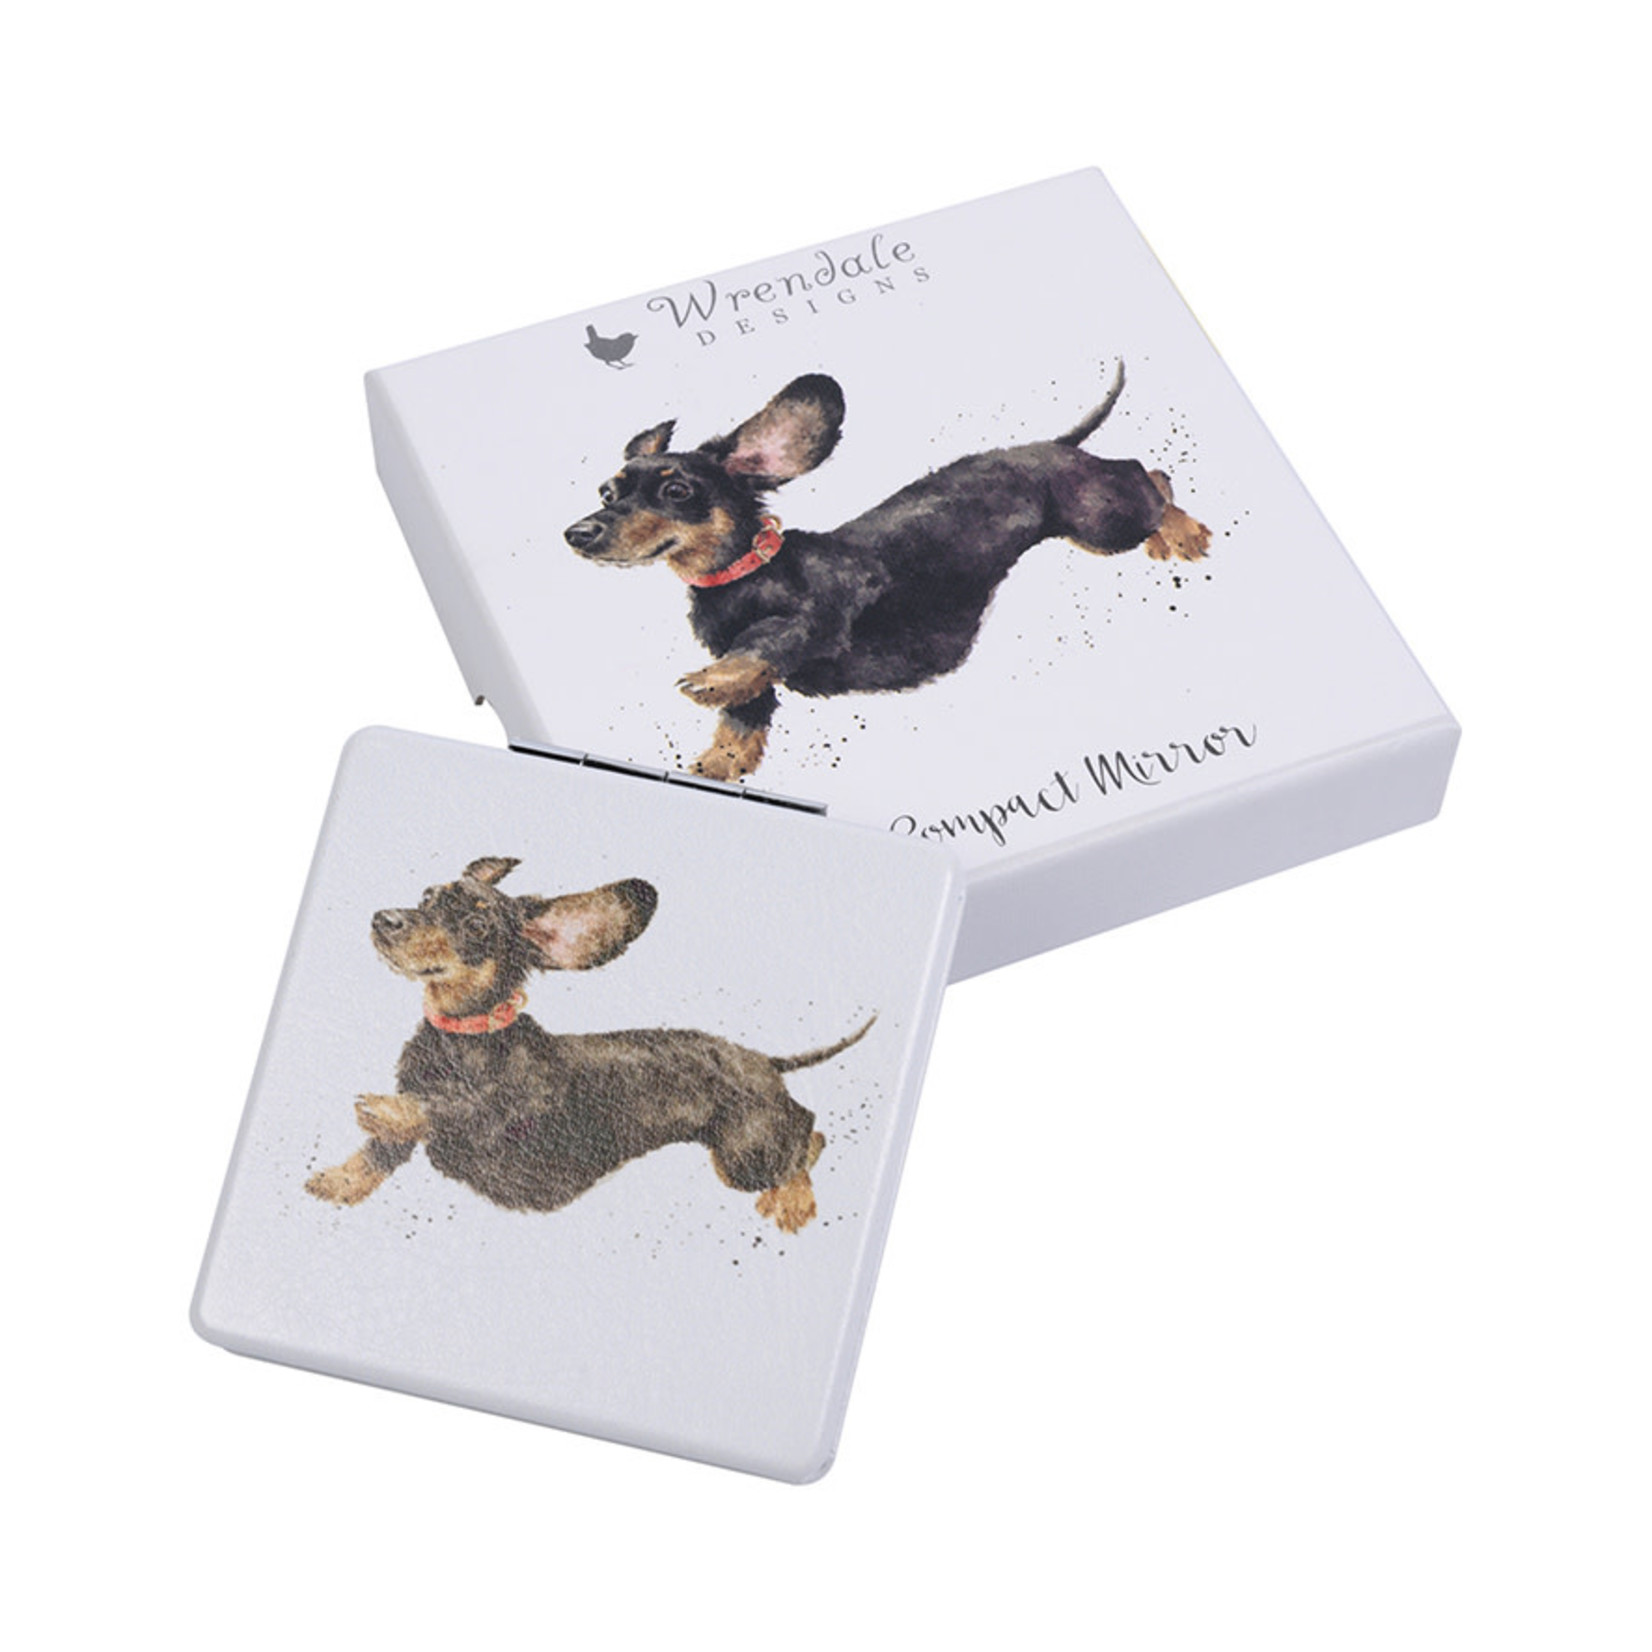 Wrendale Designs MR007 Compact Mirror - 'That Friday Feeling' Dachshund